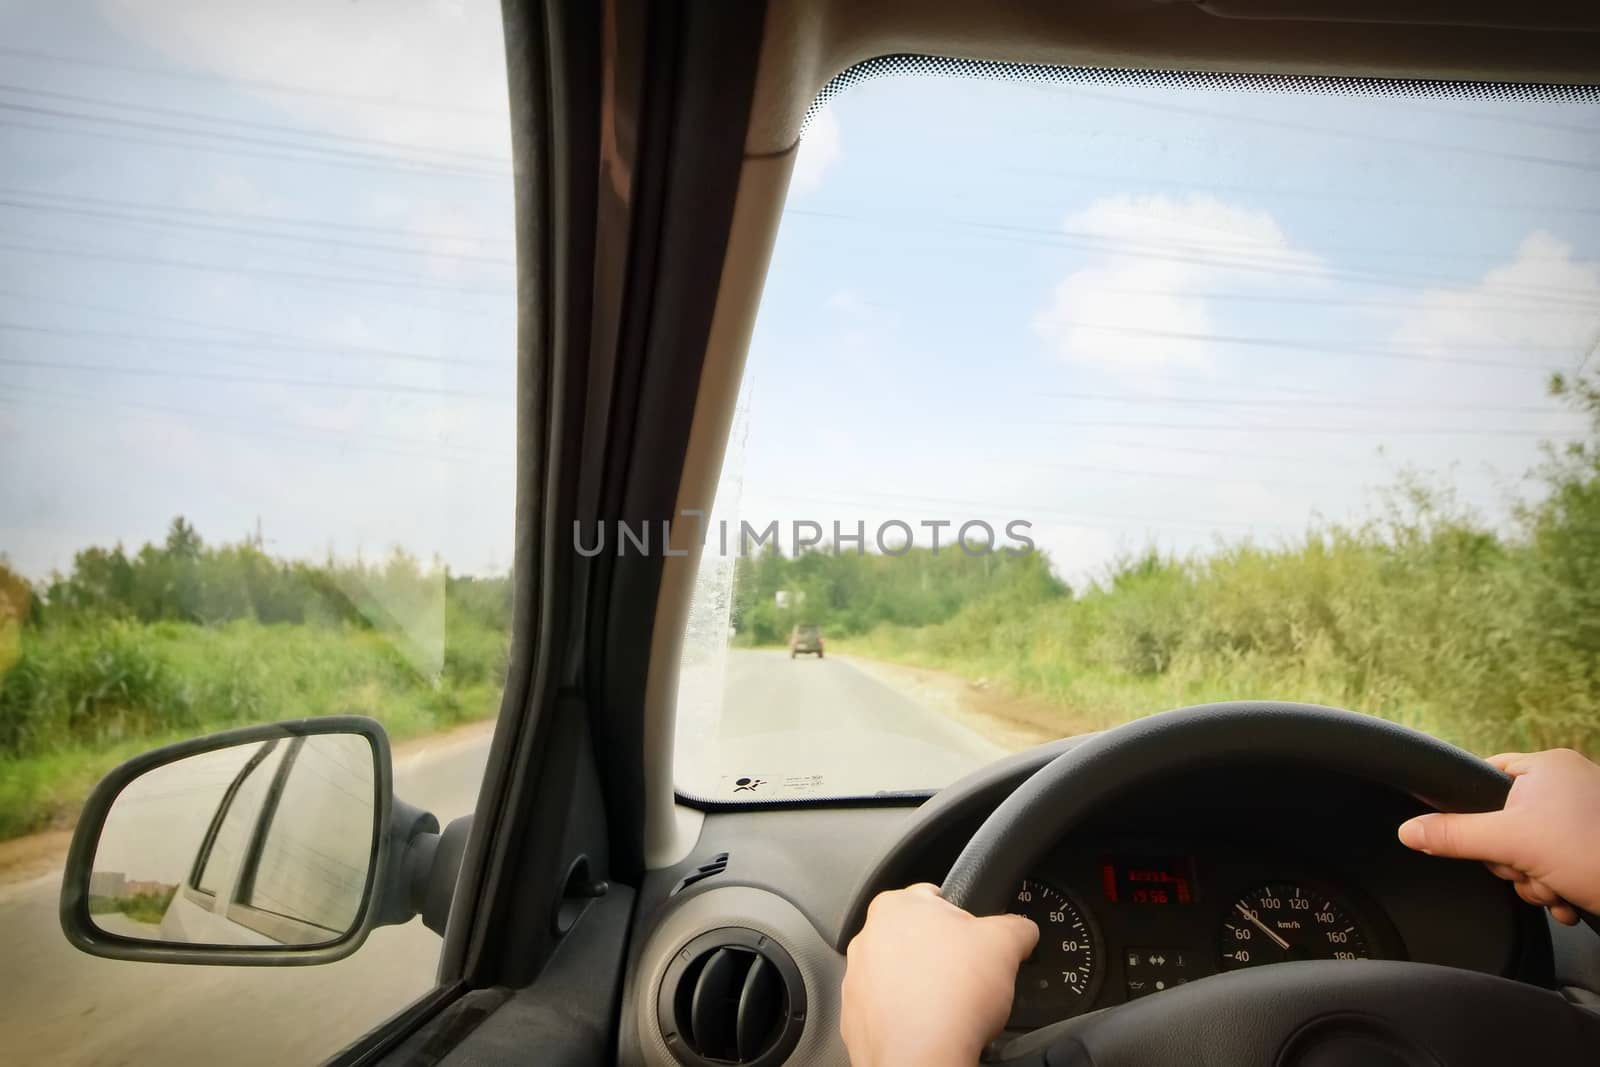 Woman driving, view inside a car on a road